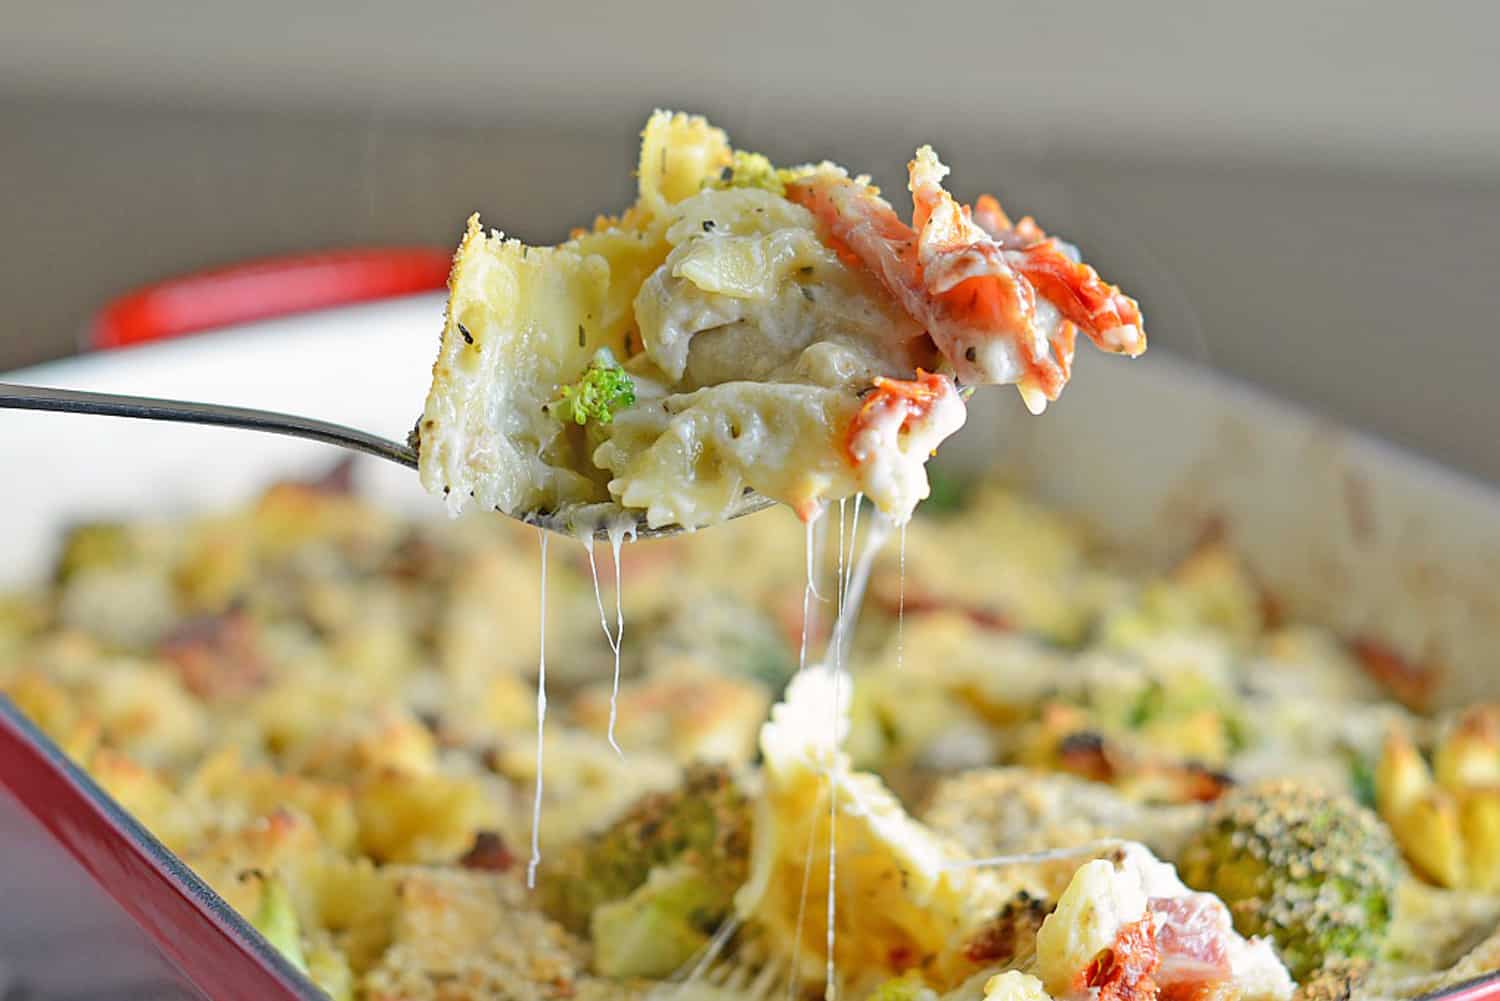 Cheesy Chicken Casserole is an easy casserole recipe perfect for feeding a large family on a budget. Chicken, cheese, pasta and vegetables- delicious! #easycasserolerecipes #bestchickenrecipes www.savoryexperiments.com 